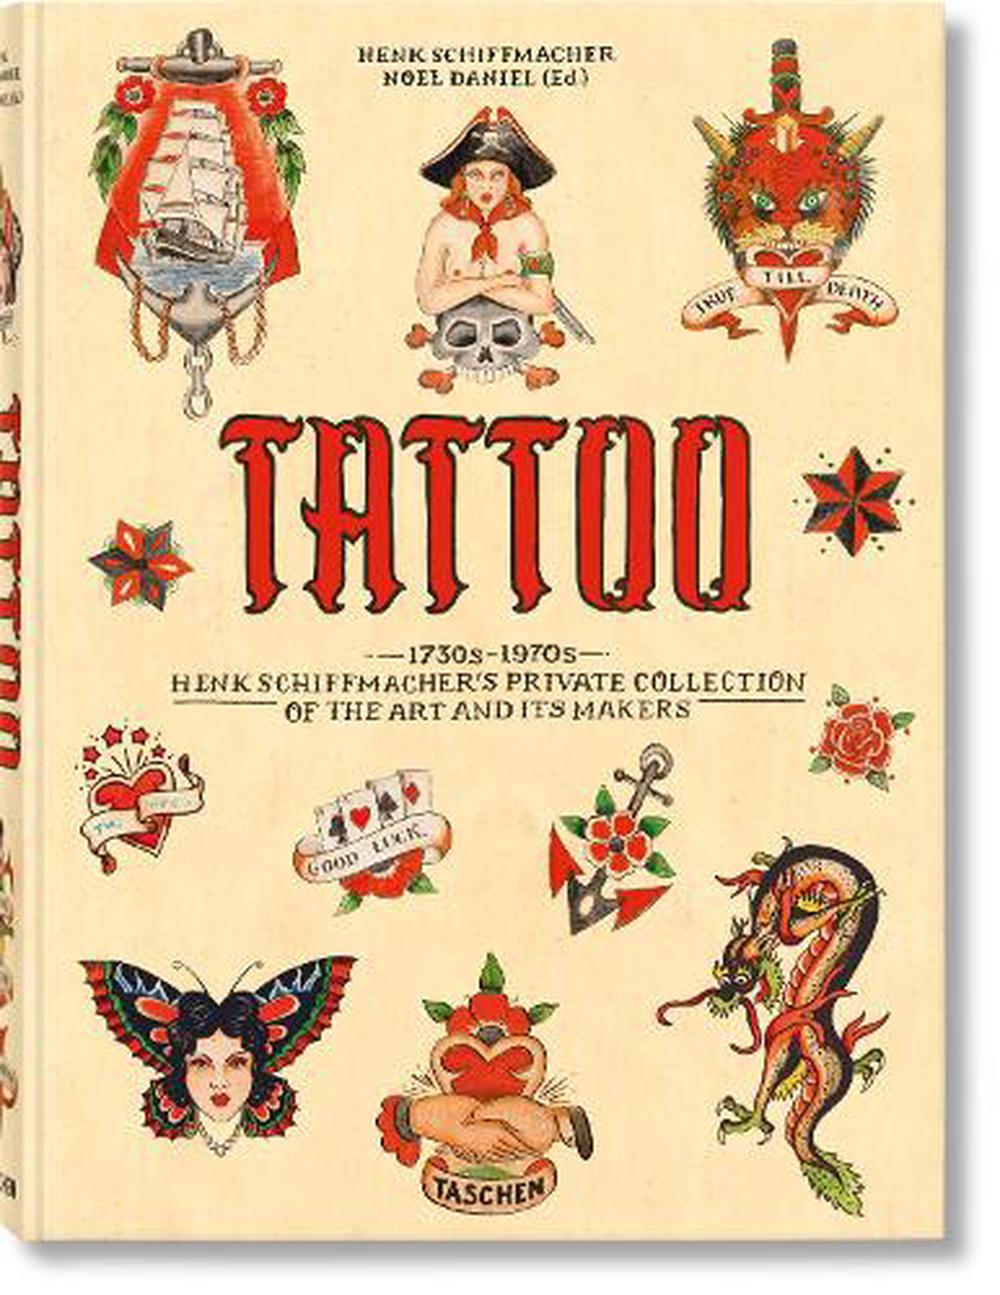 Tattoo. 1730s-1970s. Henk Schiffmacher's Private Collection by Henk